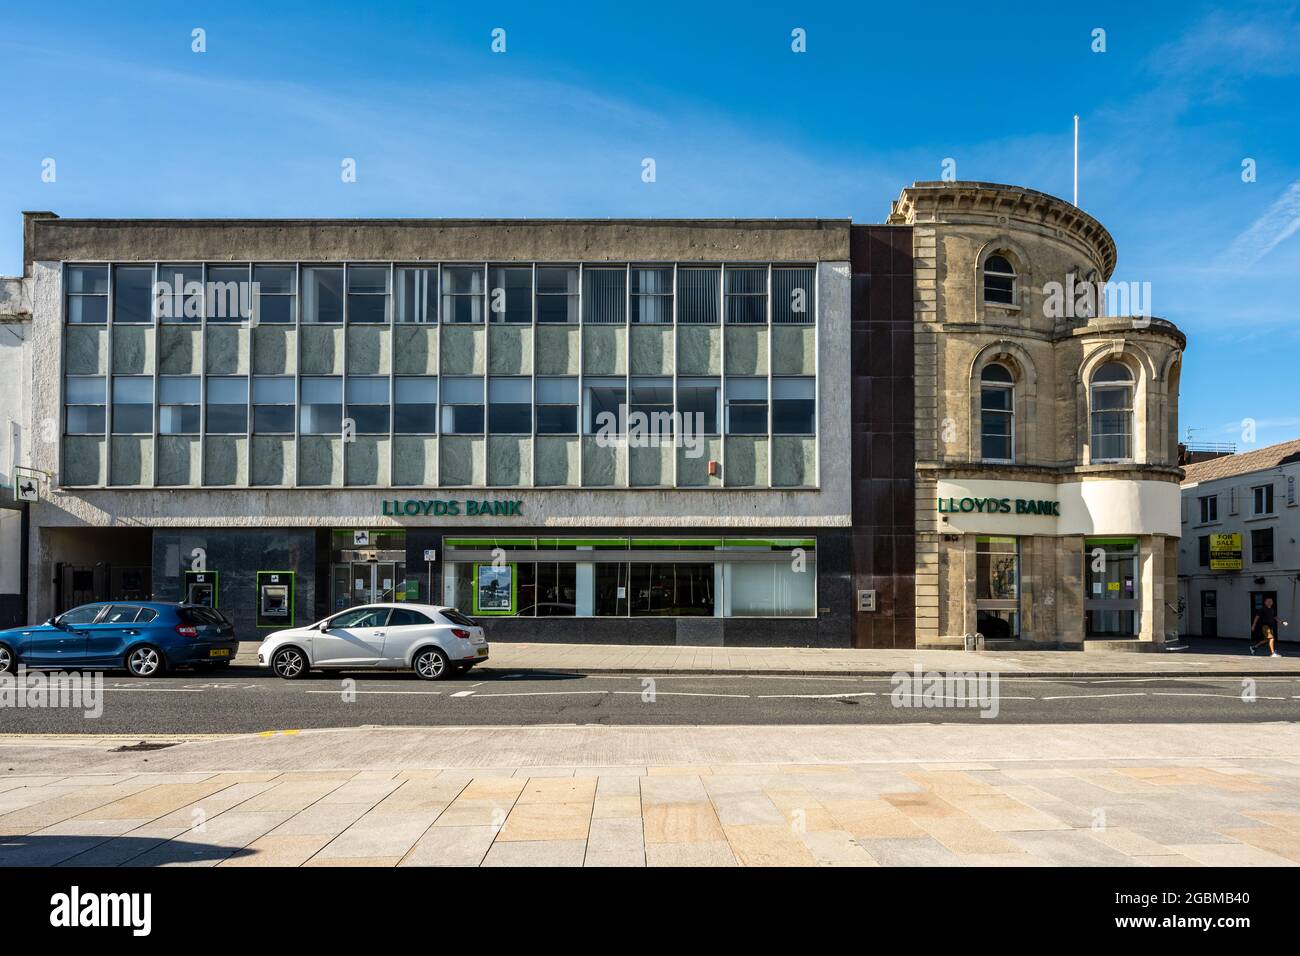 Traditional and modern architectural styles contrast in the Lloyds Bank branch building in Weston-Super-Mare, Somerset. Stock Photo